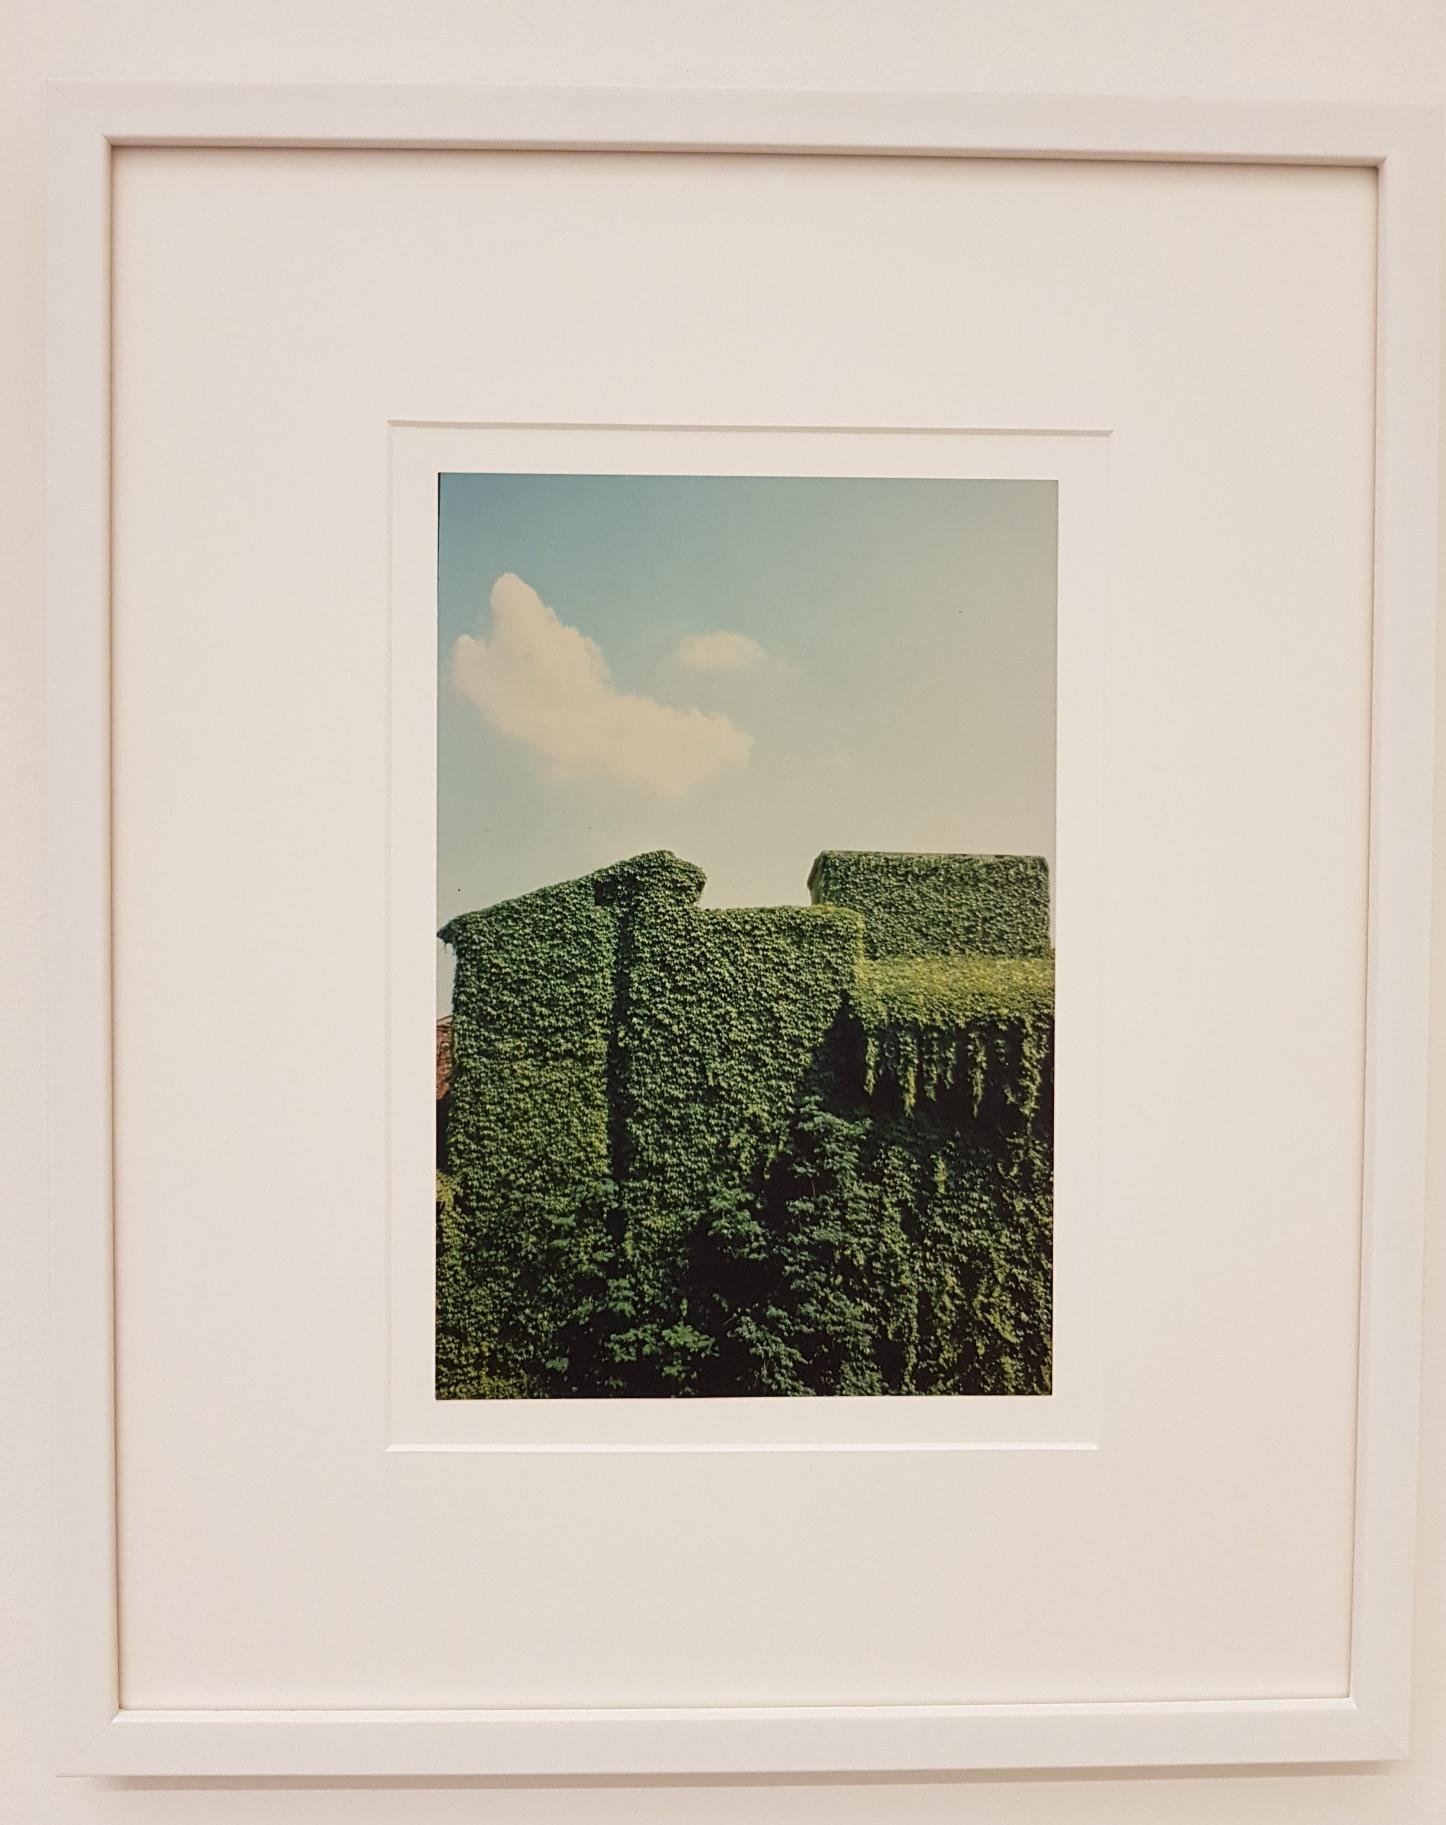 Ferrara 1981, From the series Topographie – Iconographie (1978-1982) 
Dimensions: cm 23.2 x cm 15.7, opaque without border

Luigi Ghirri is born on January 5, 1943 in Scandiano, near Reggio Emilia. Life in the province of Emilia-Romagna, Italy’s